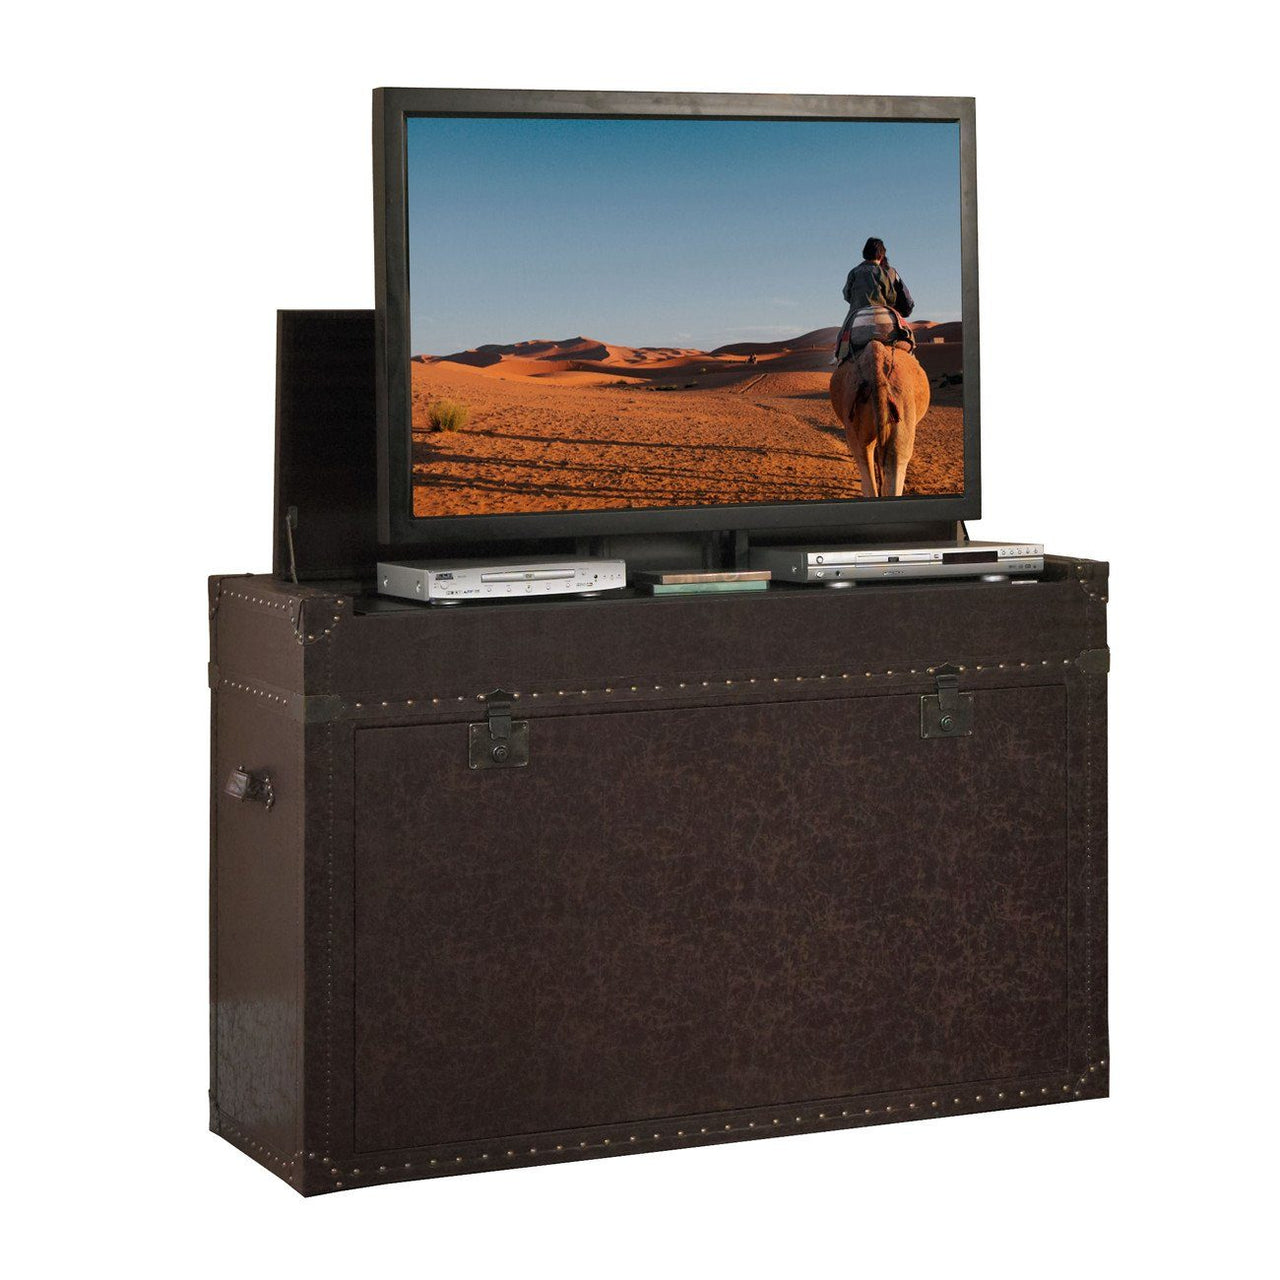 Touchstone Ellis Trunk Tv Lift Cabinets For Up To 46” Flat Screen Tv’S Tv Lift Cabinets Touchstone 